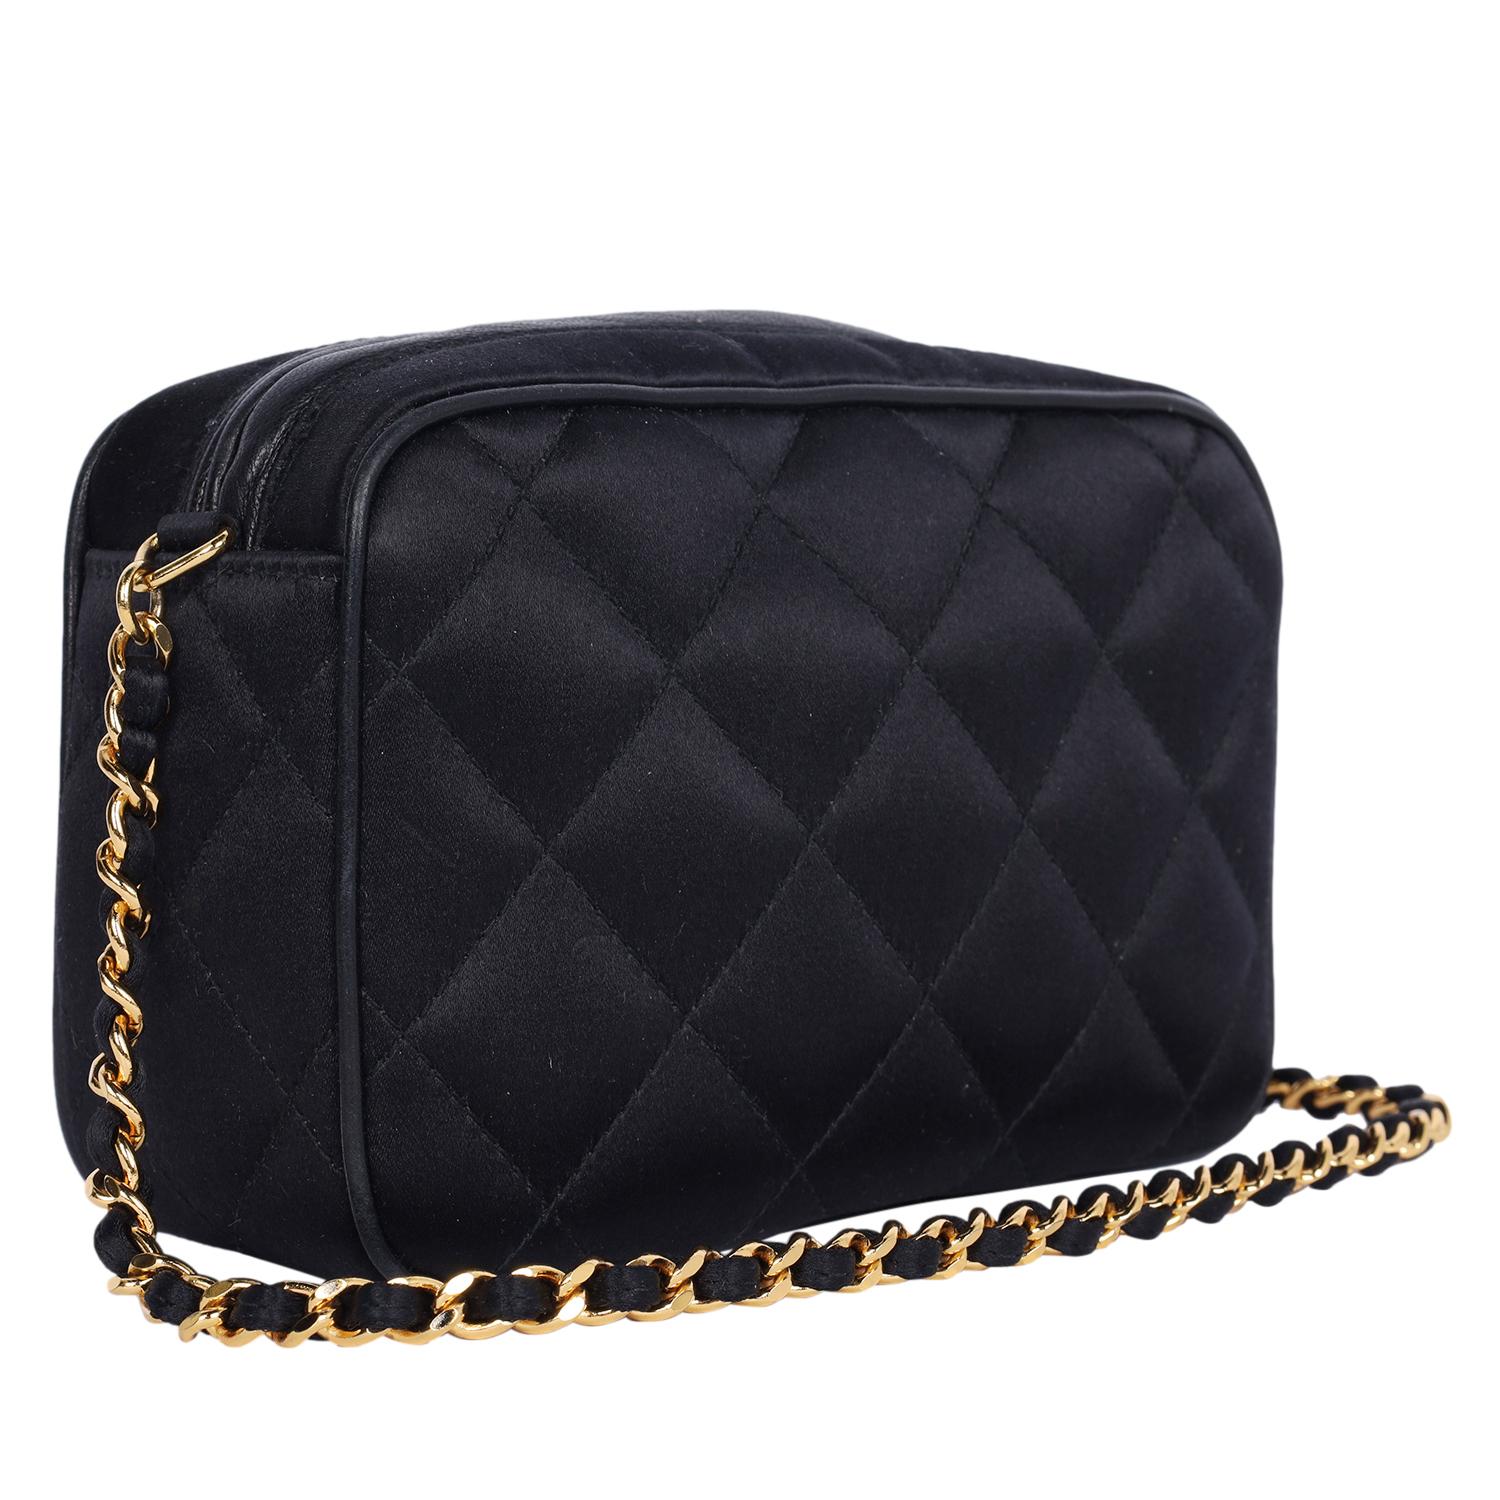 Chanel Mini Satin Leather Quilted Camera Cross Body Bag 1996 For Sale 4